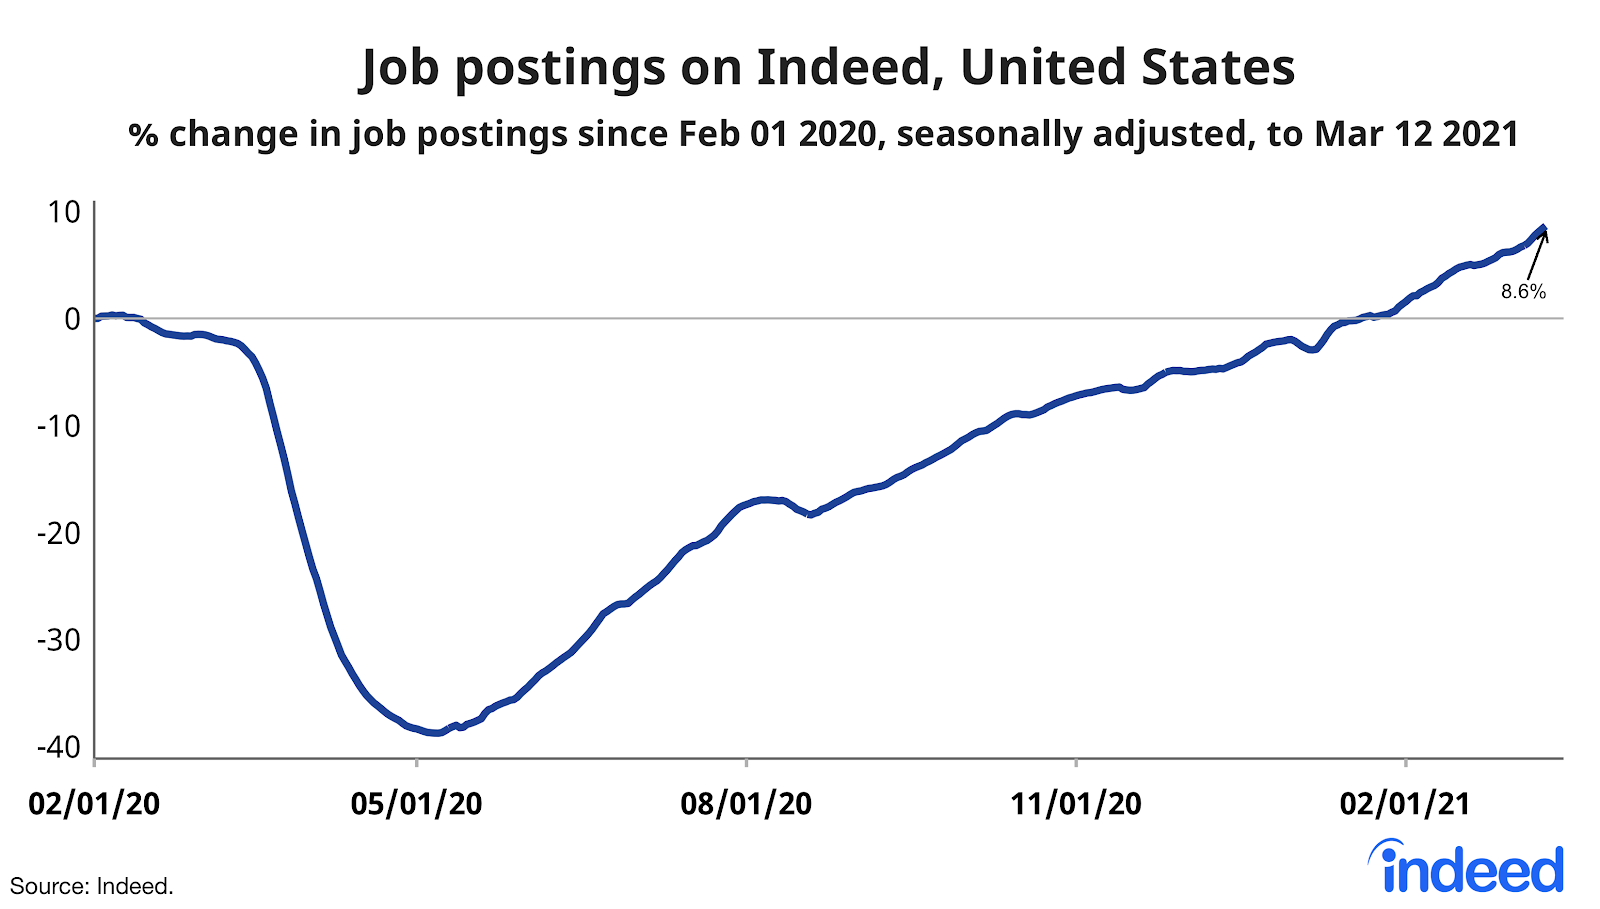 Line graph showing job postings on Indeed, United States